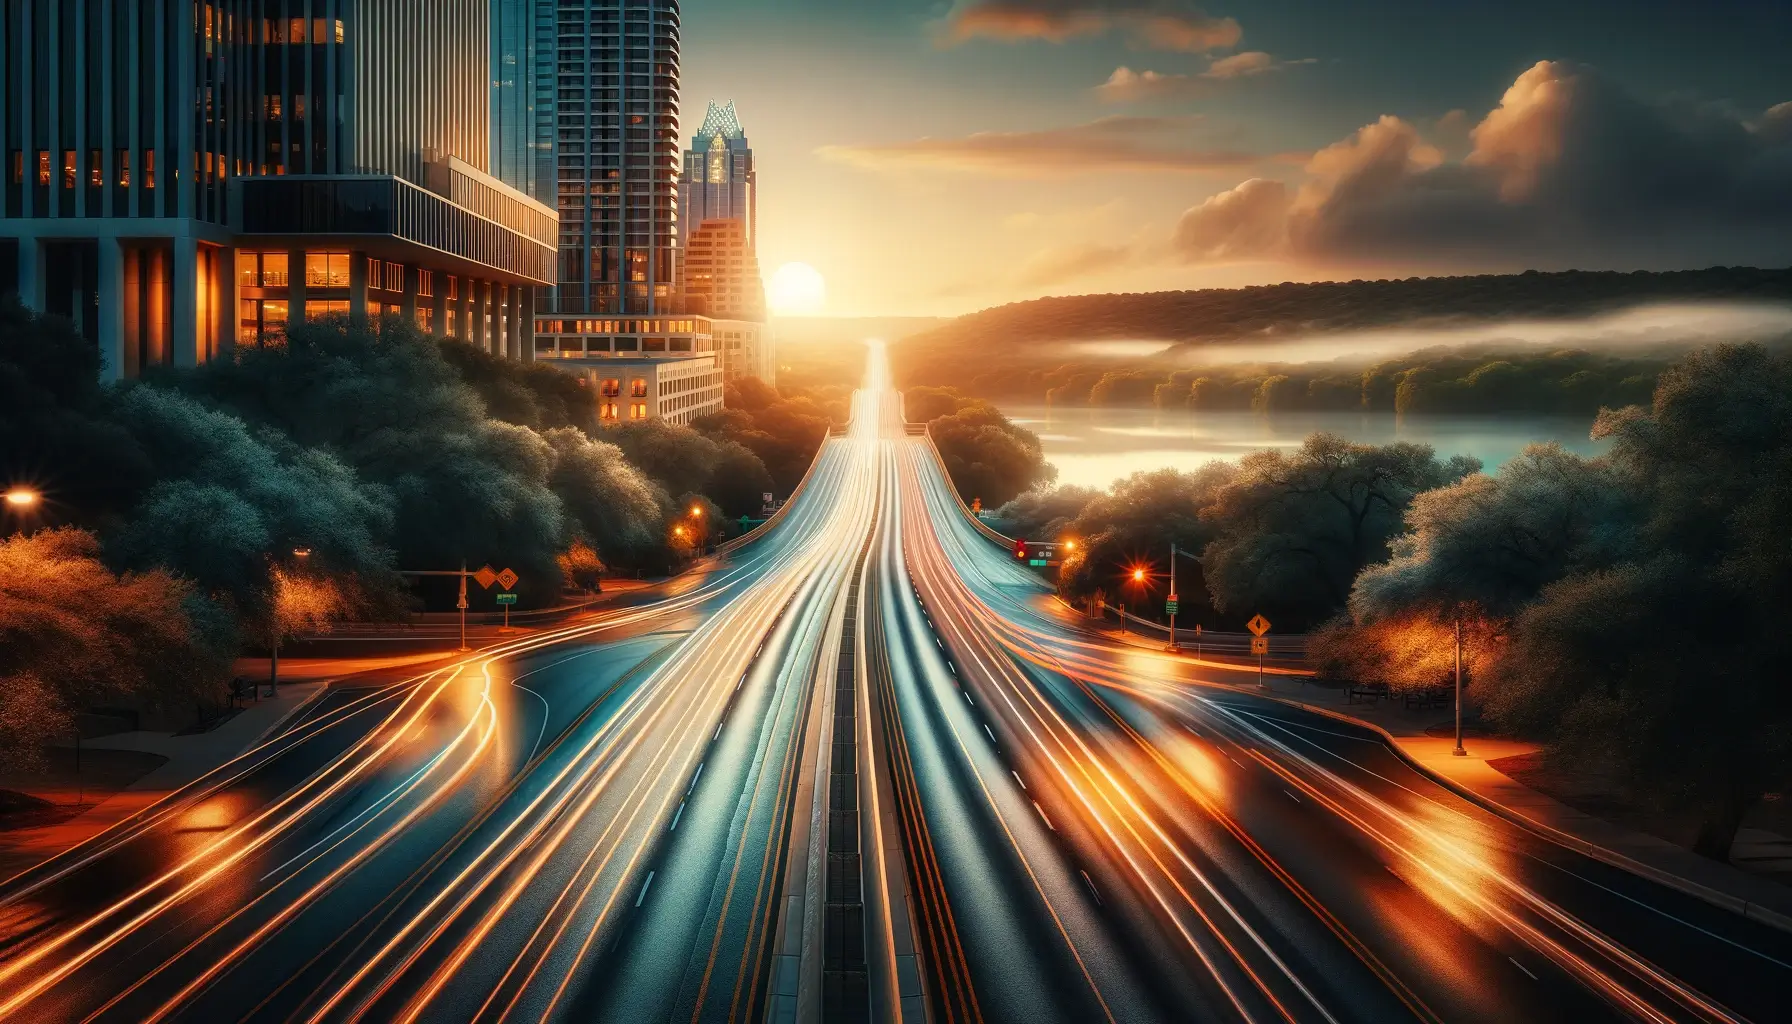 Dawn breaks over a tranquil Austin road, captured in stunning realism. The image highlights an empty street that leads towards distant natural scenery, symbolizing comprehensive protection and the tranquility it brings